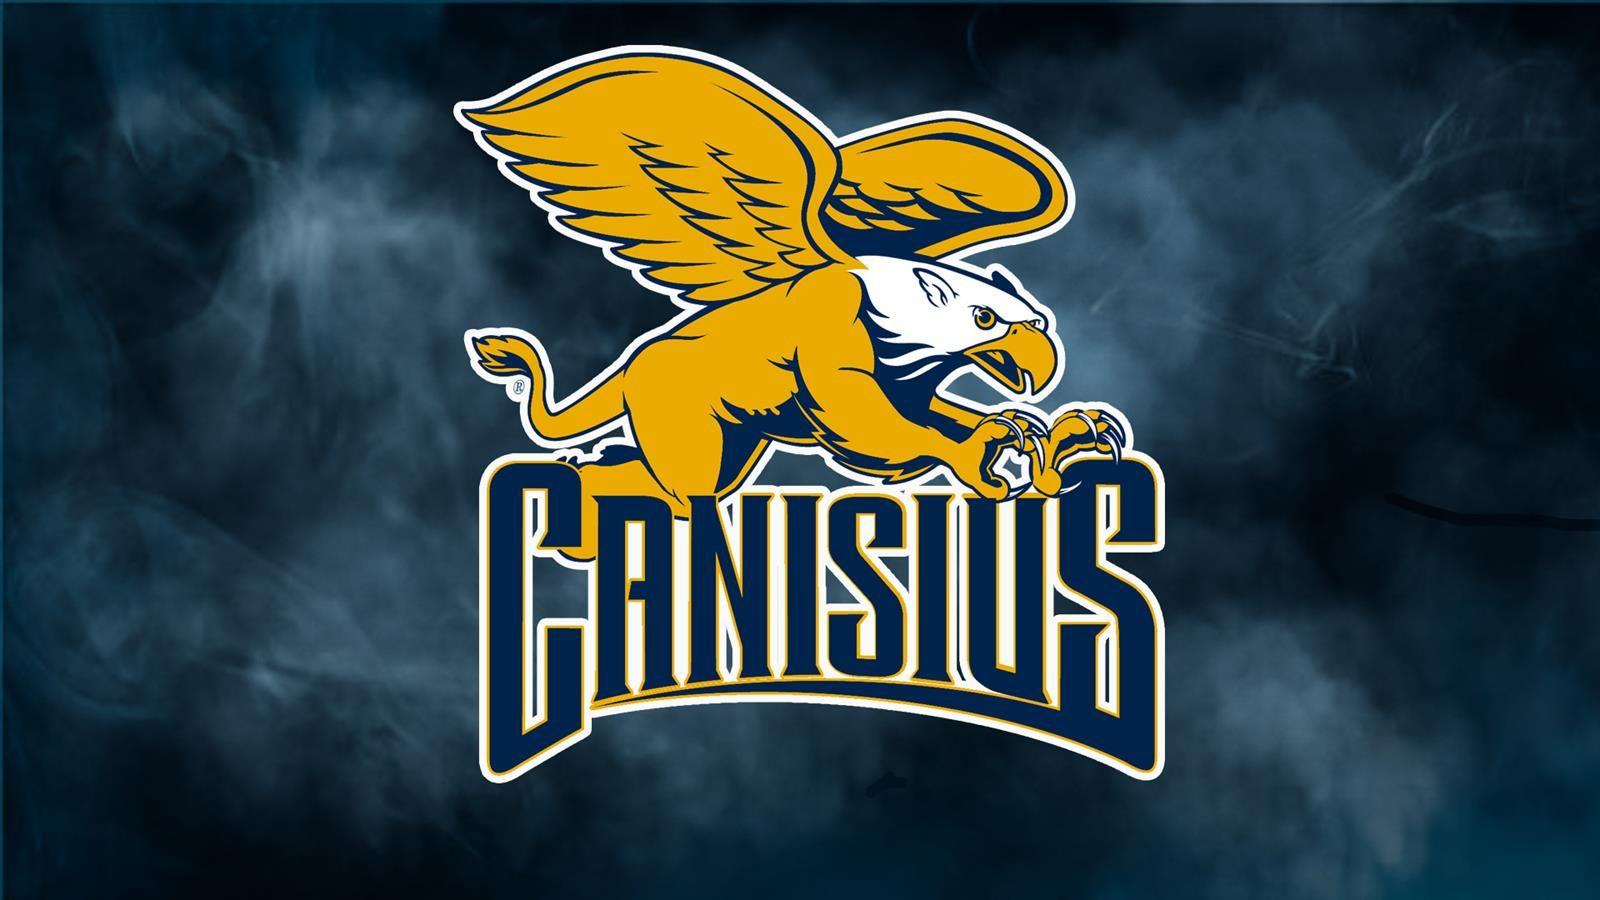 Canisius College Wallpapers Top Free Canisius College Backgrounds